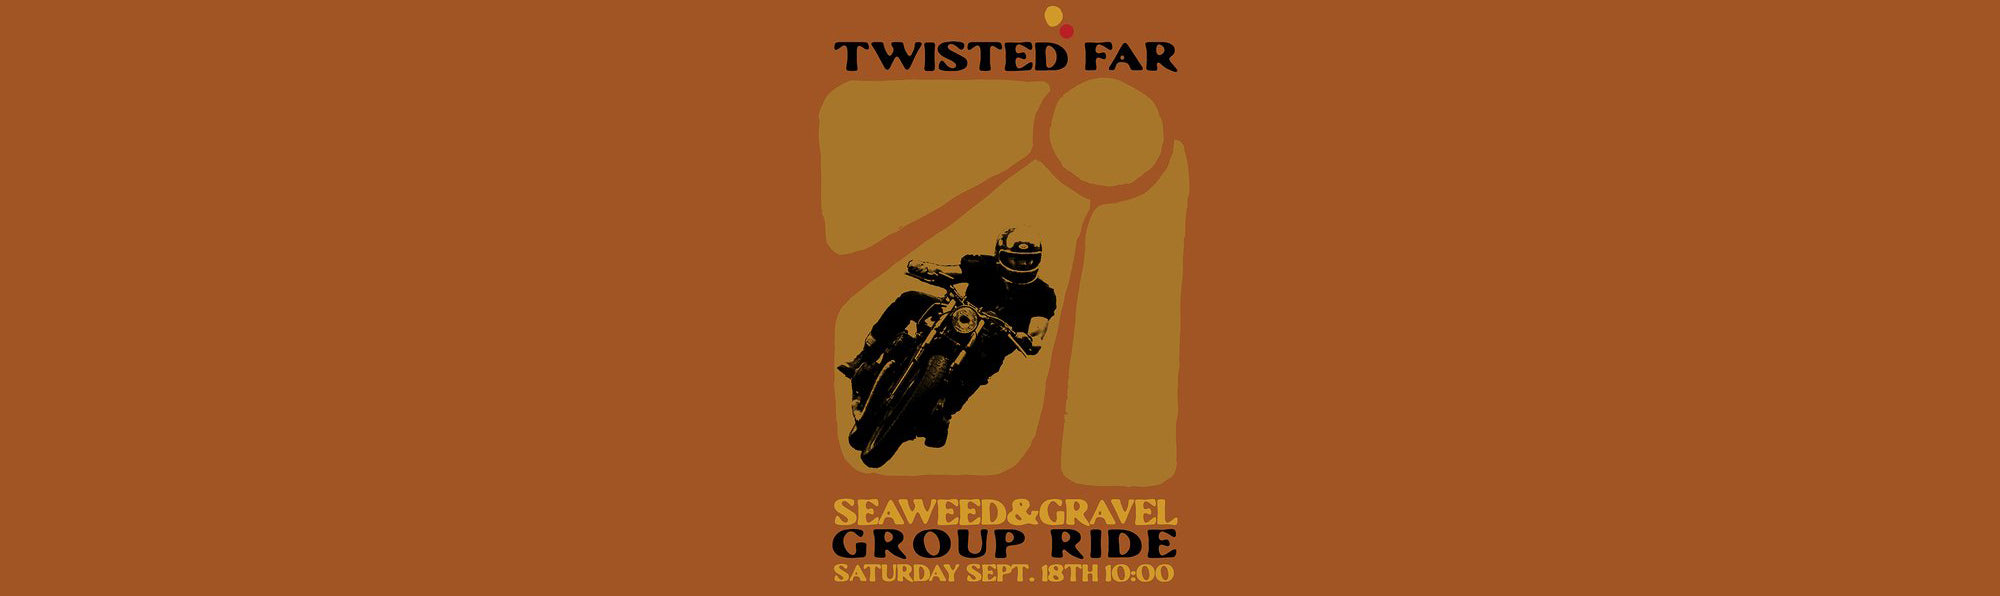 "Twisted Far" Group Ride